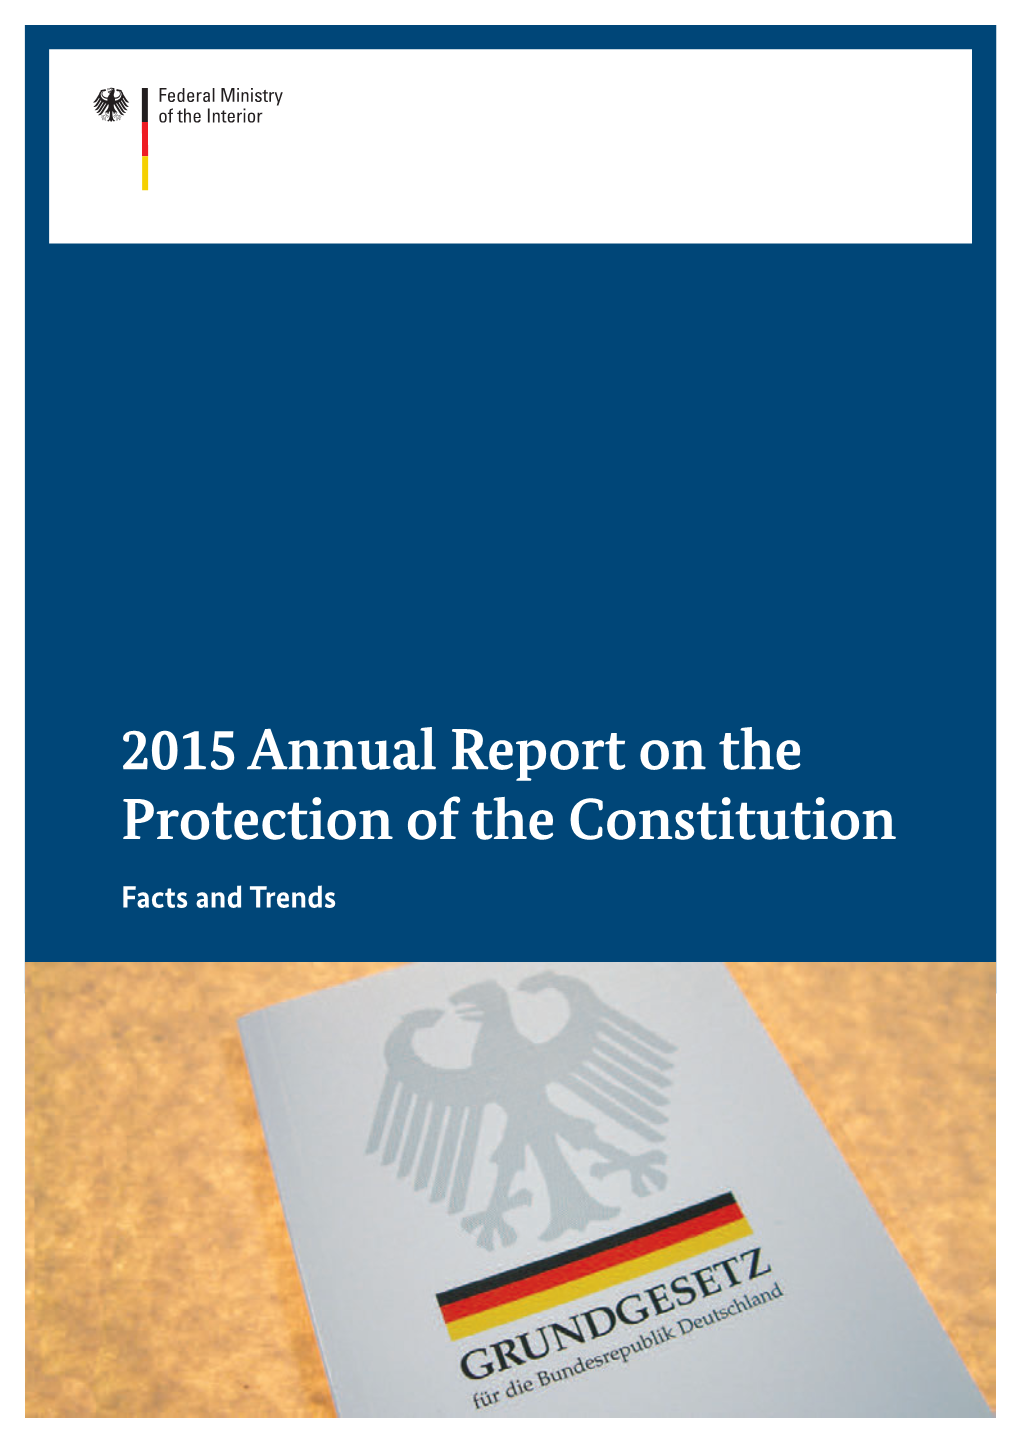 2015 Annual Report on the Protection of the Constitution